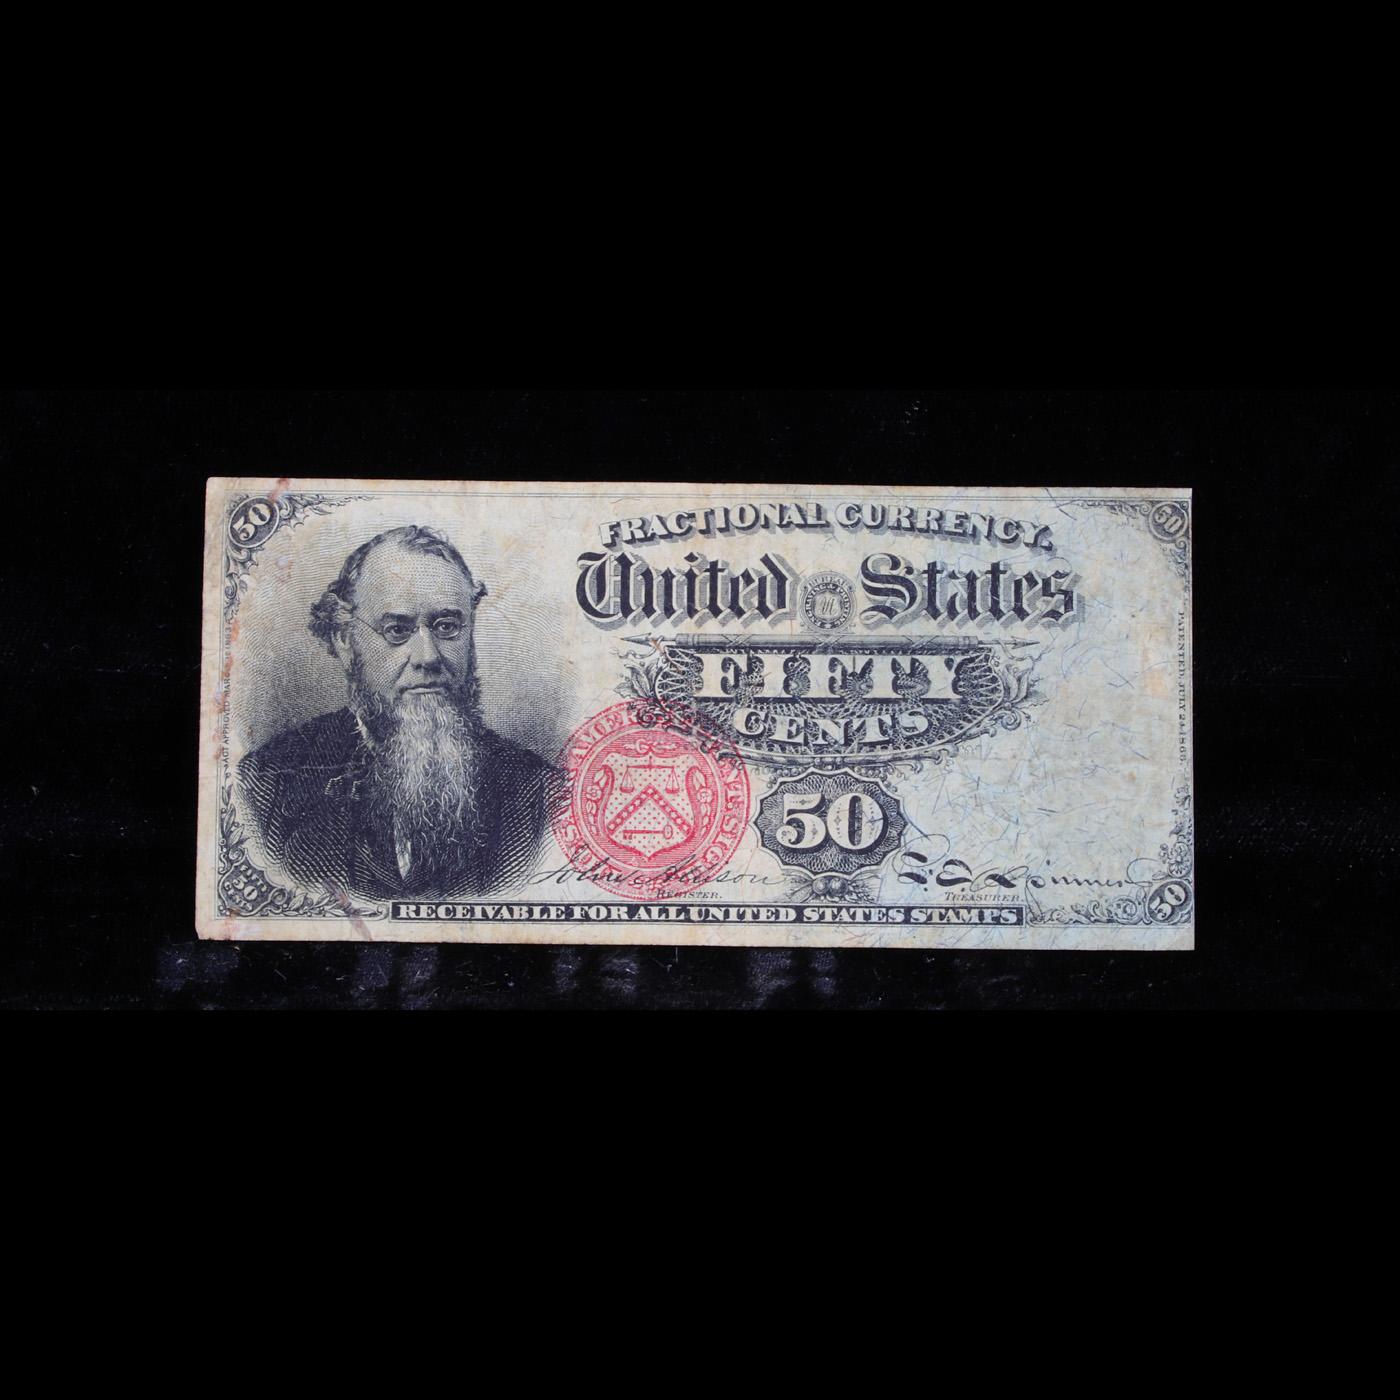 1870's US Fractional Currency 50¢ Fourth Issue Fr-1376 Grades vf++